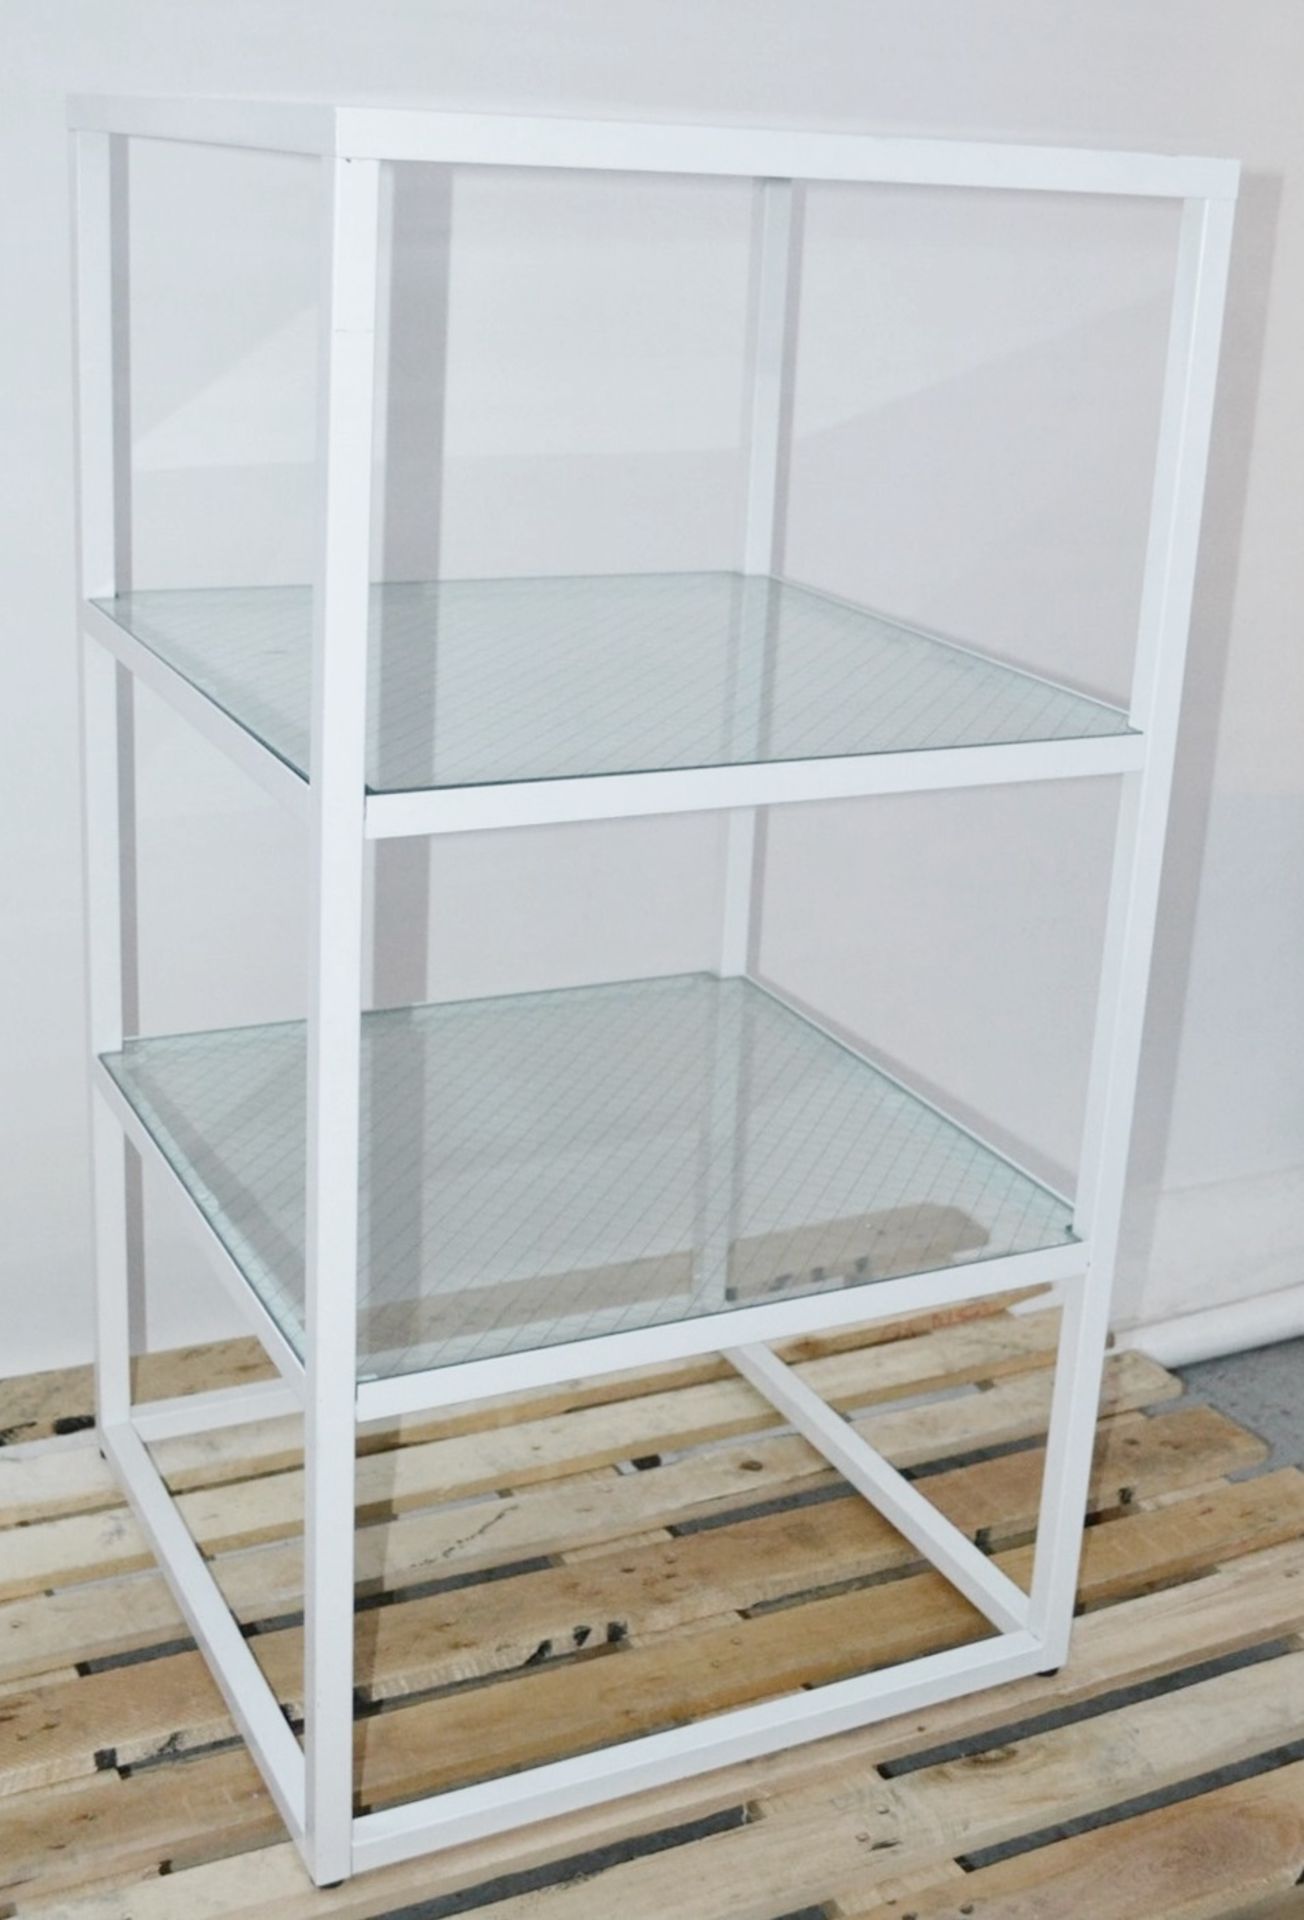 1 x 3-shelf Metal Shop Display / Storage Unit In White - Features A Sturdy Welded Metal Construction - Image 5 of 8